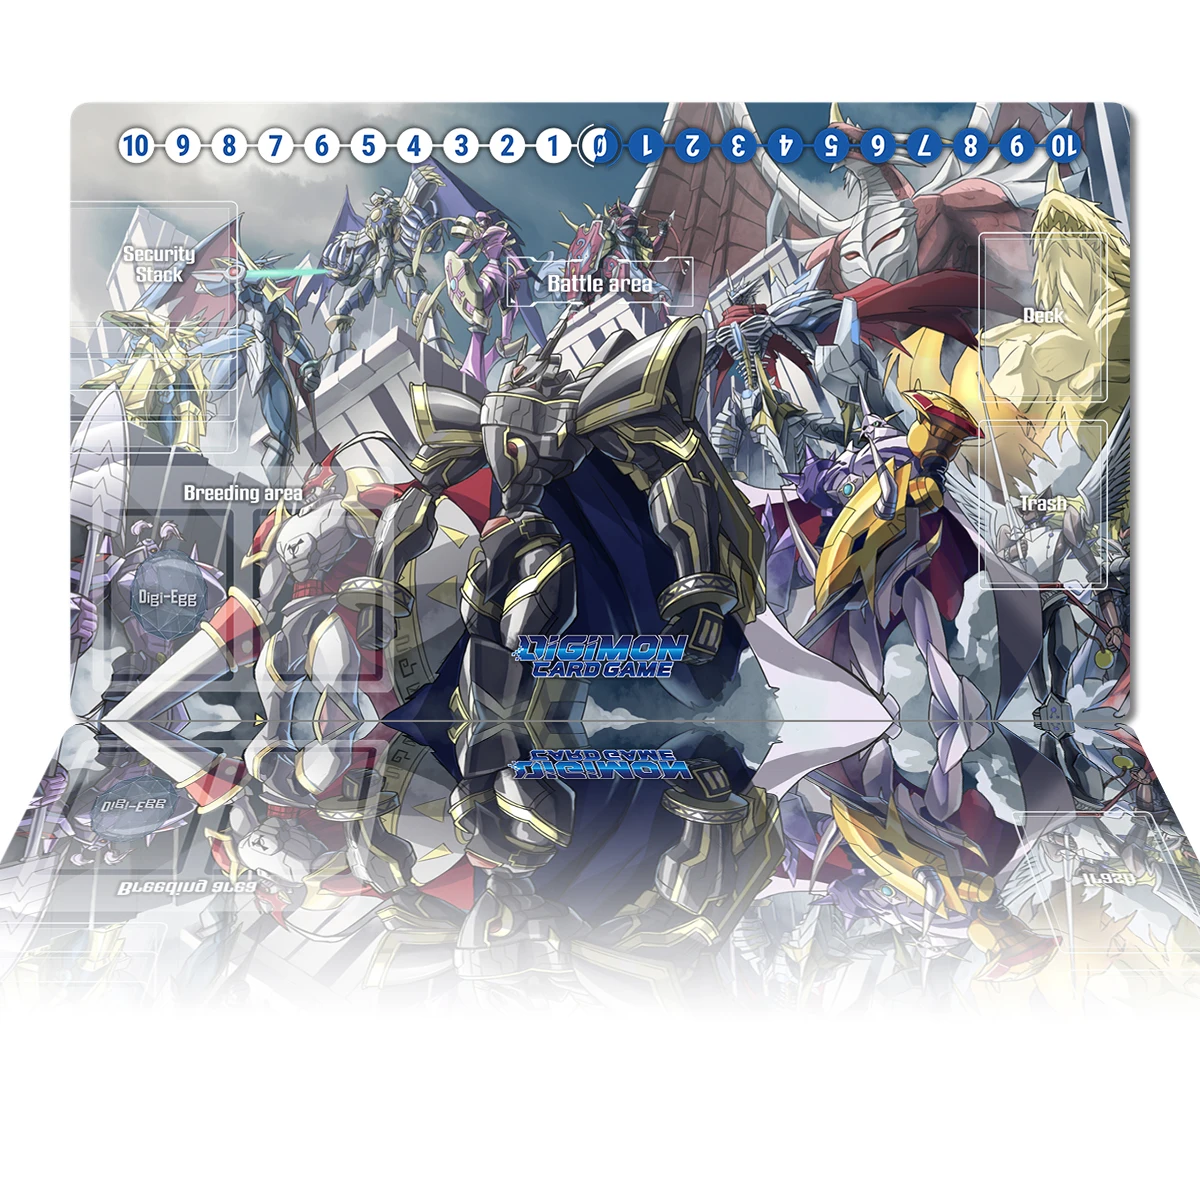 

Digimon TCG Playmat Dukemon Royal Knights DTCG CCG Trading Card Game Board Game Mat Anime Mouse Pad Rubber Desk Mat & Free Bag